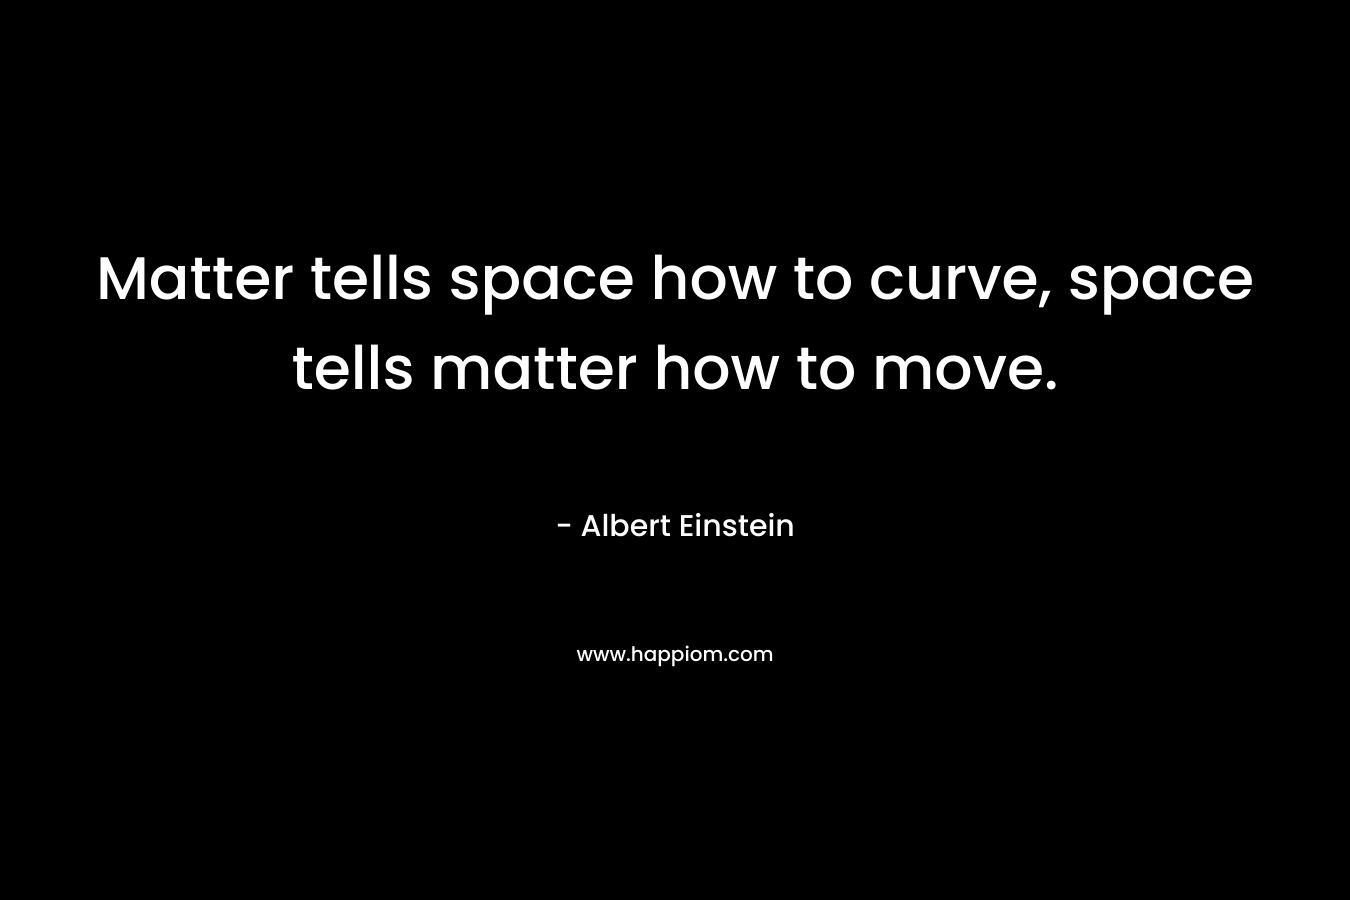 Matter tells space how to curve, space tells matter how to move.